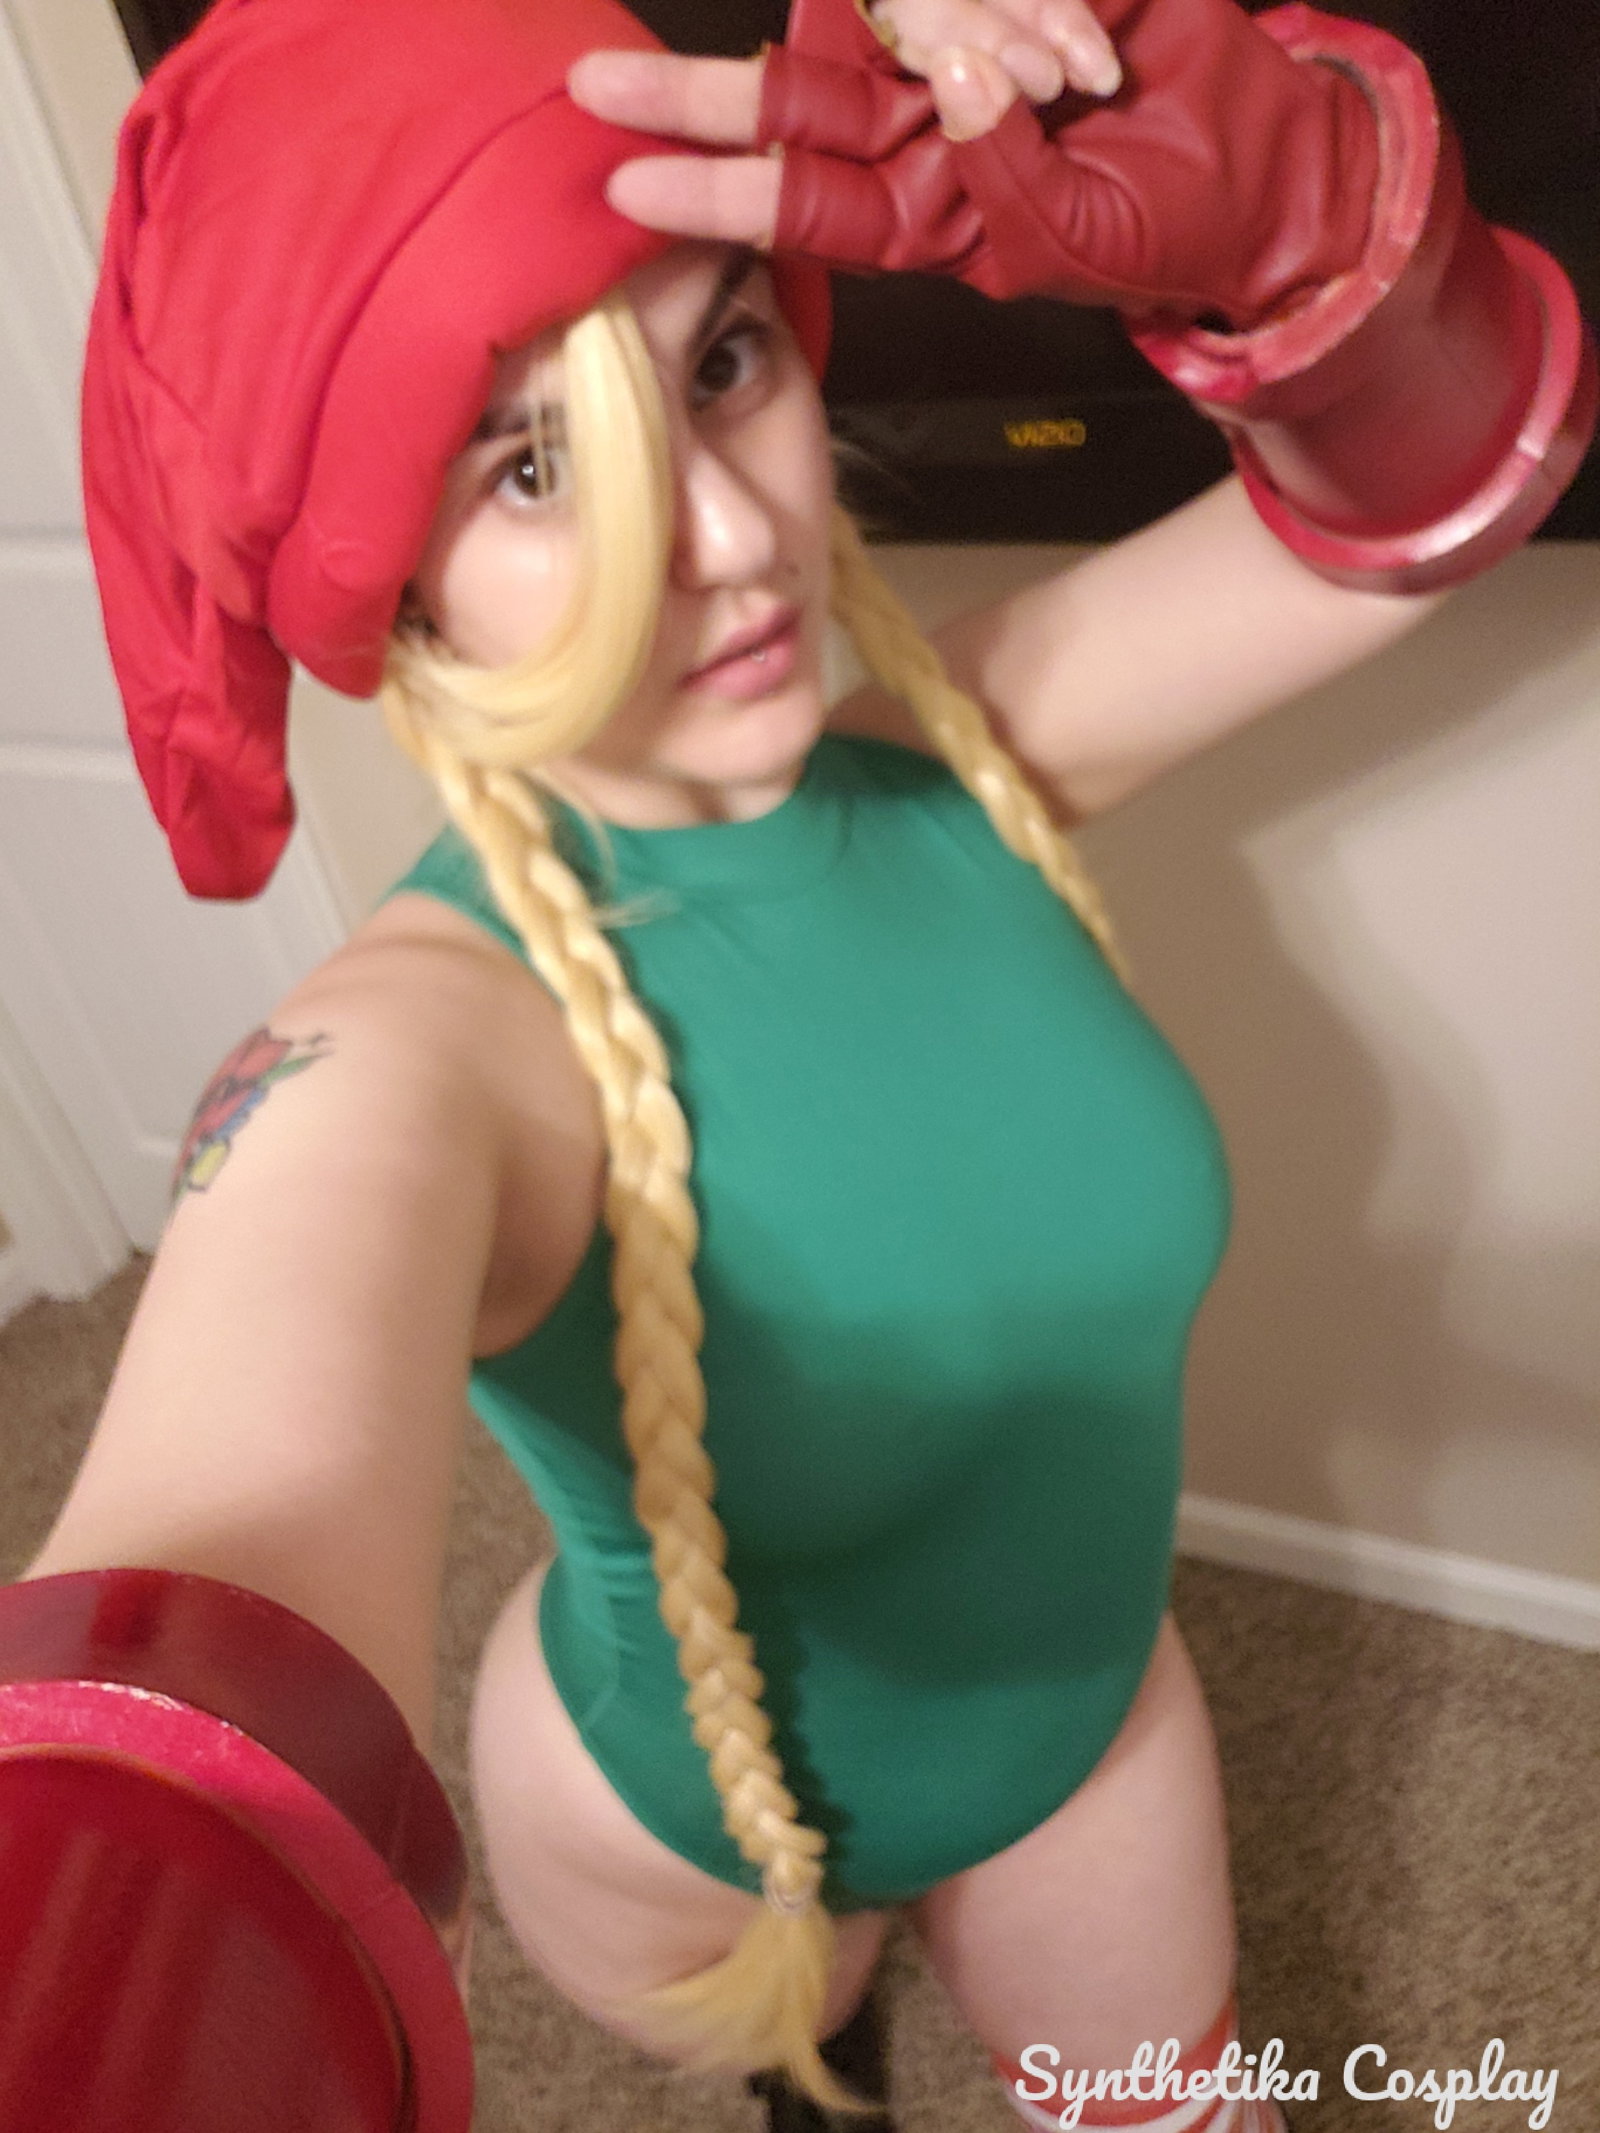 Photo by SynthetikaCosplay with the username @SynthetikaCosplay, who is a star user,  December 13, 2018 at 3:24 AM. The post is about the topic Cosplay and the text says 'Would you kiss Christmas elf Cammy underneath the mistletoe?
🍭🍭🍭🍭'